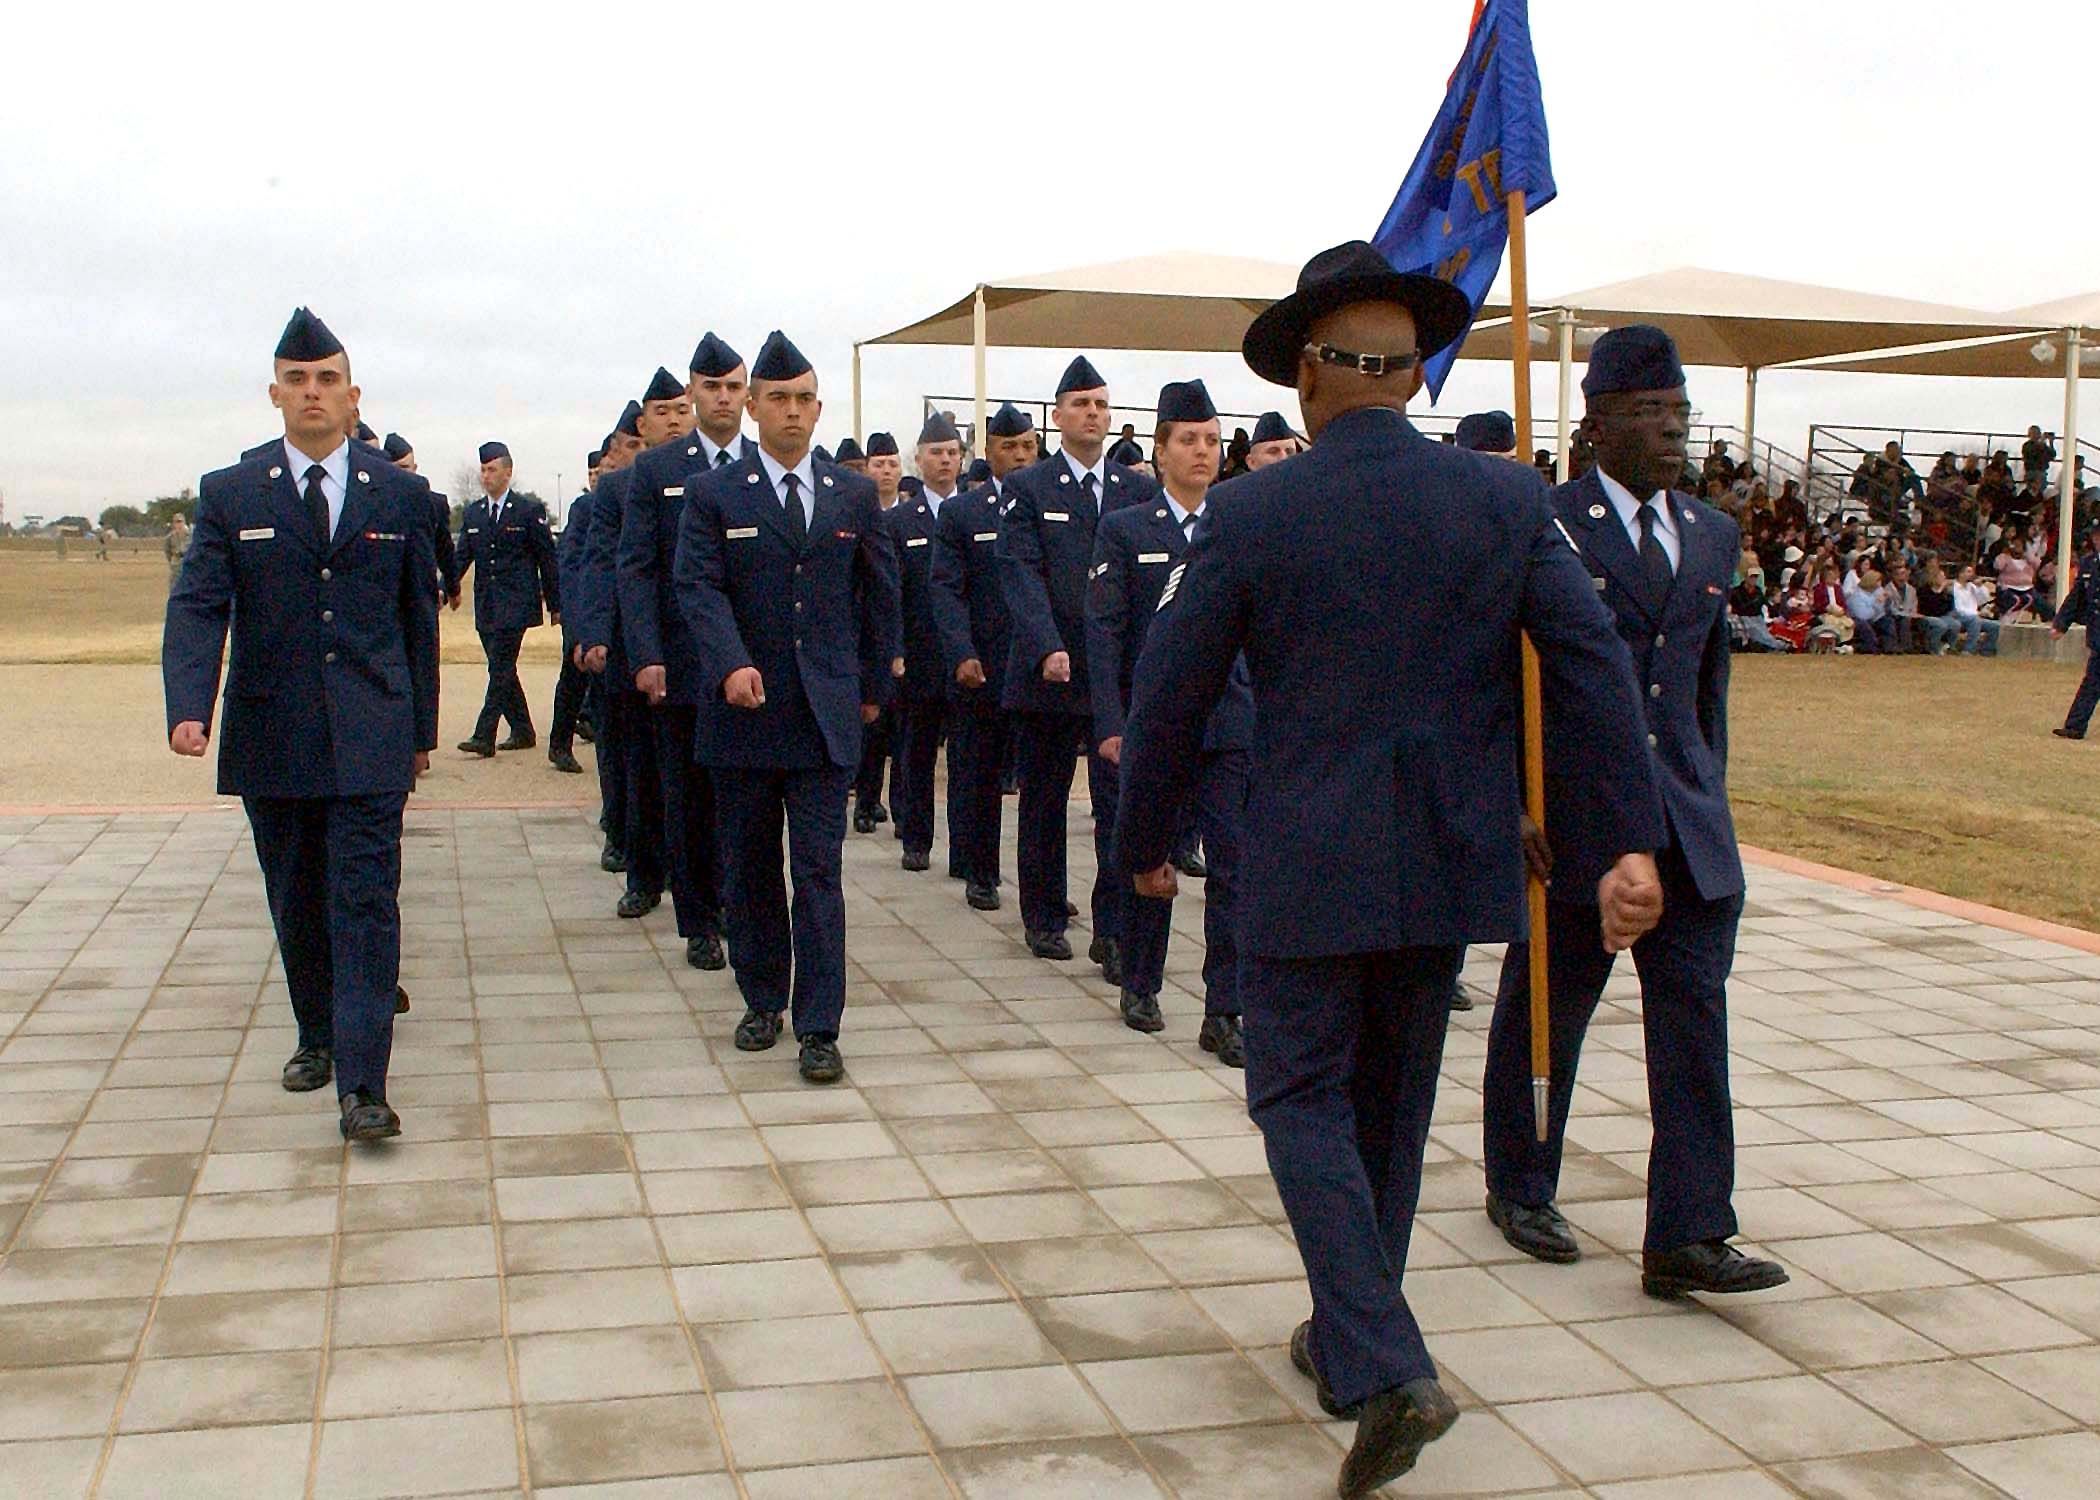 A womans guide to surviving Air Force basic training….. Trying to get a head start!